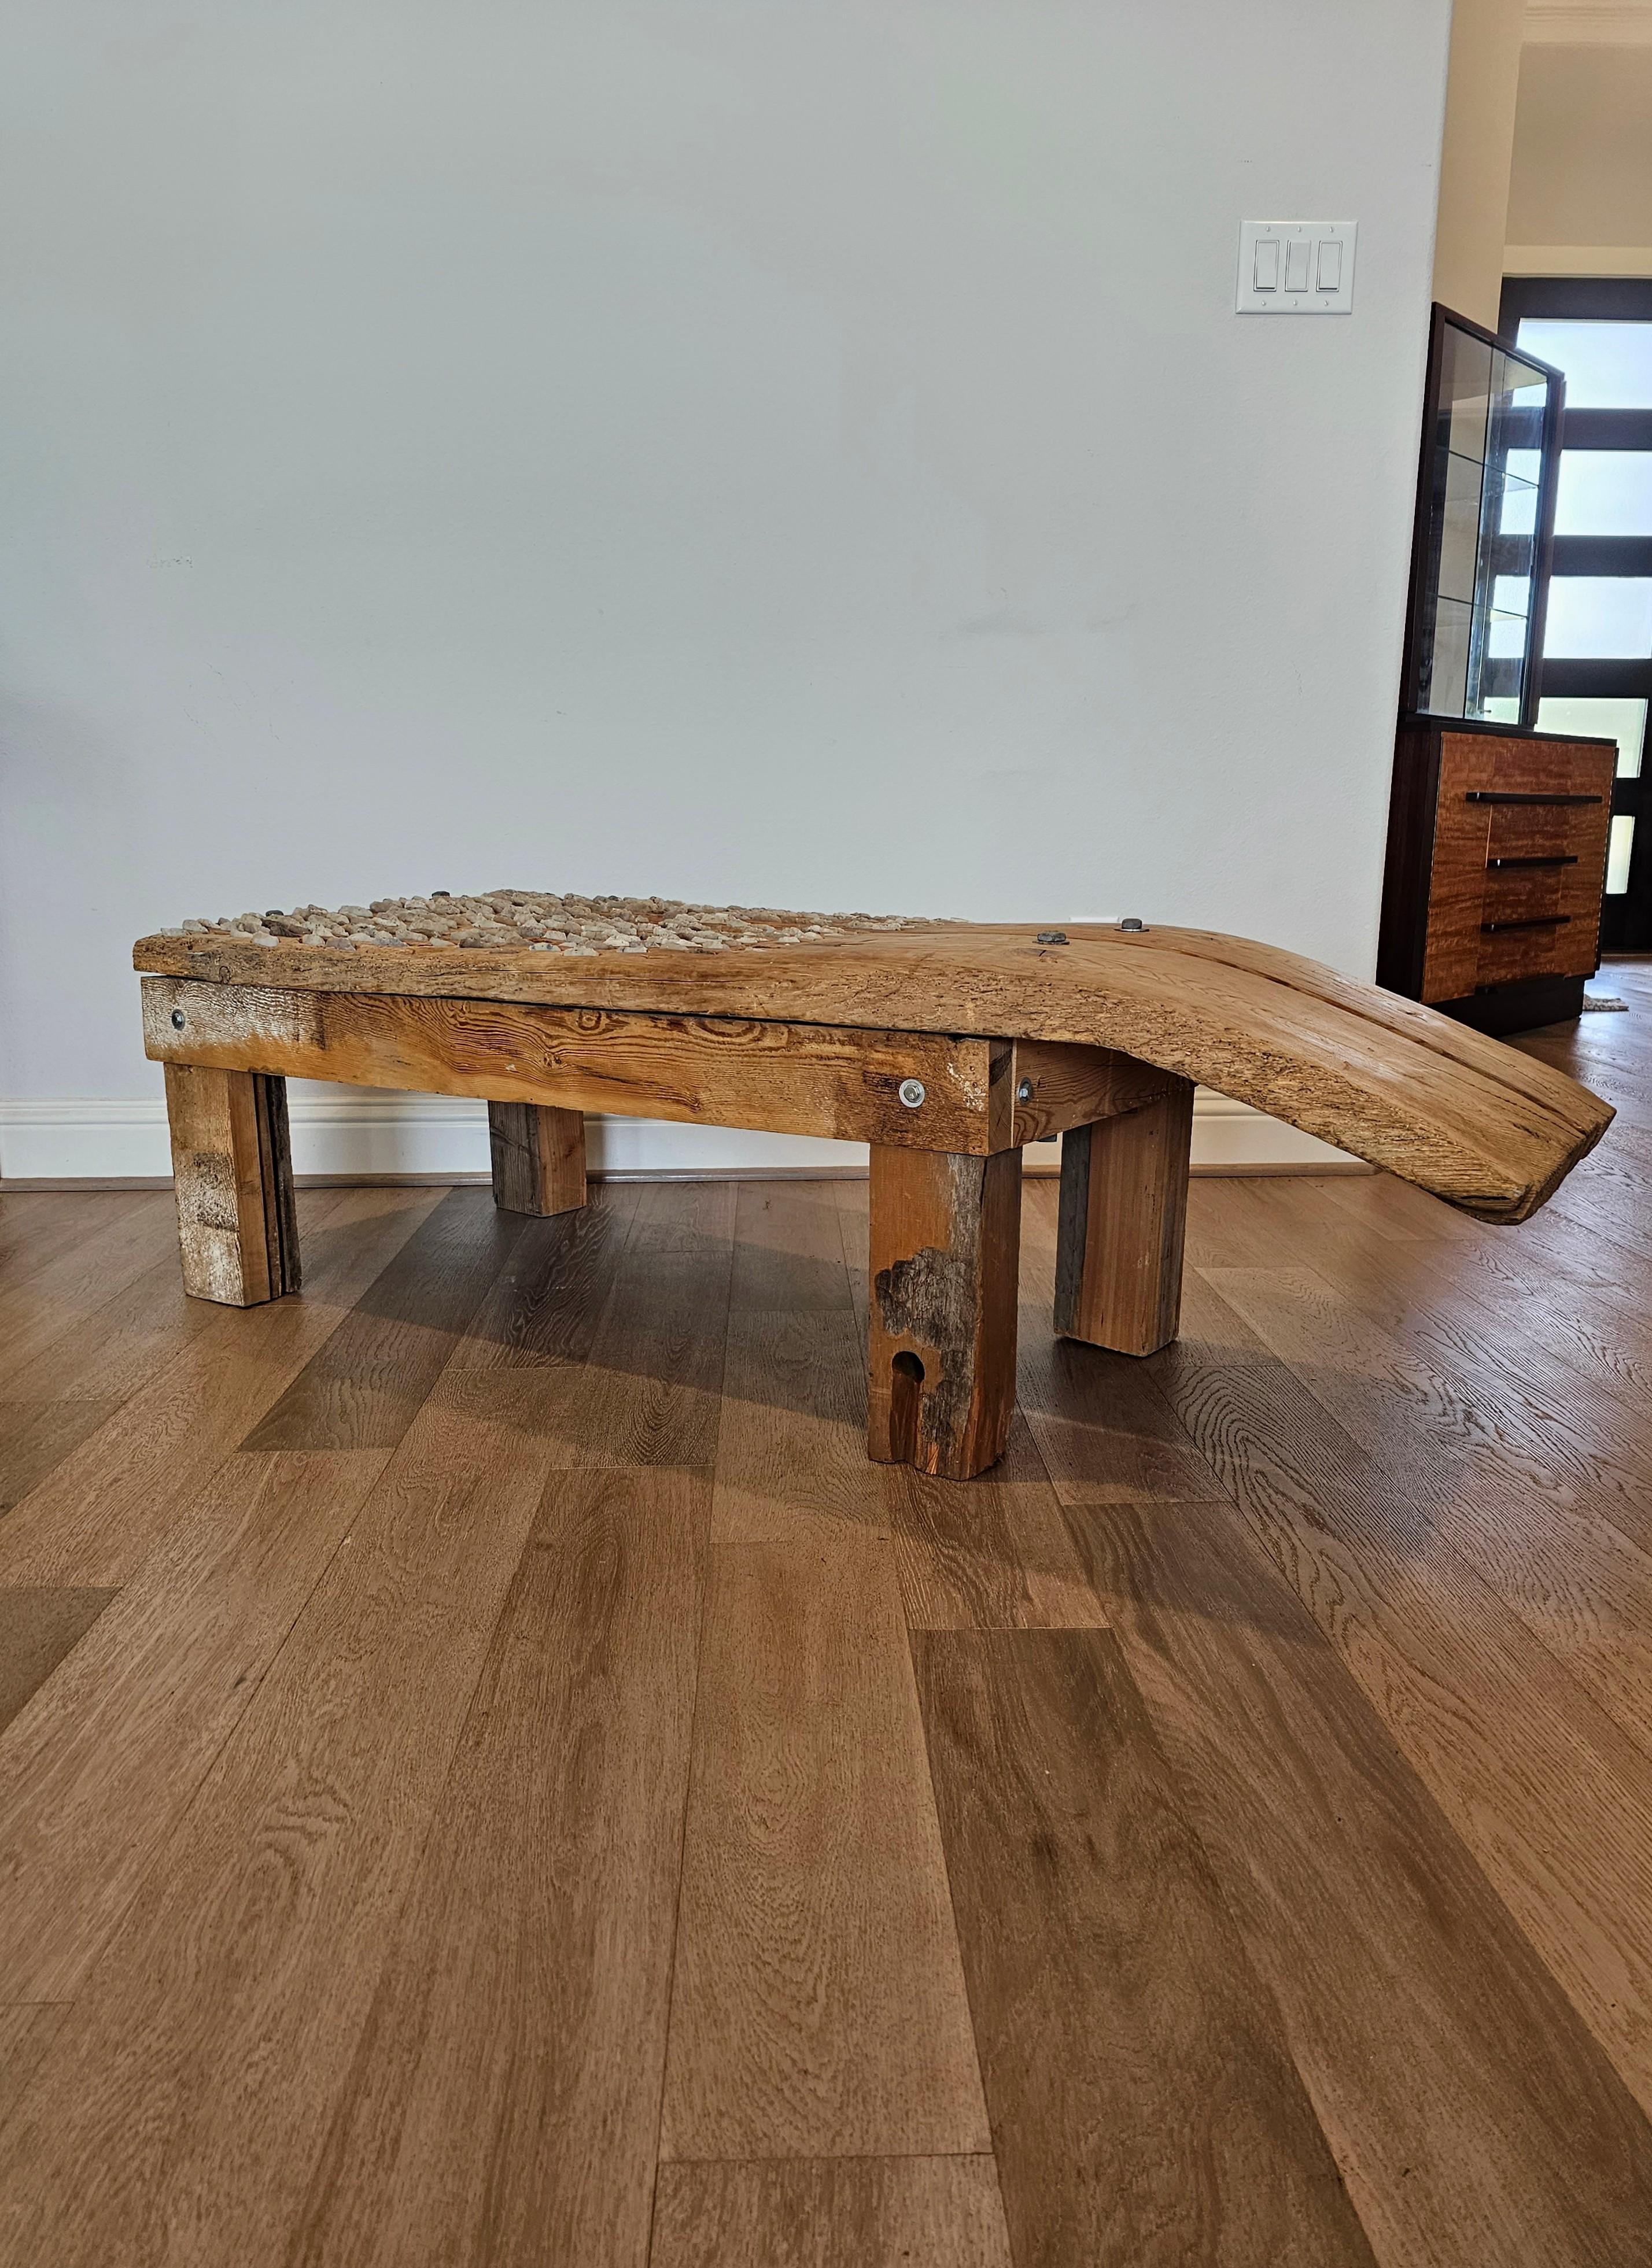 A most impressive antique Mediterranean threshing board repurposed as a bench or coffee table. 

This 19th century thresing board, also known as threshing sledge or tribulum, was a primitive agricultural implement - farm tool used to separate